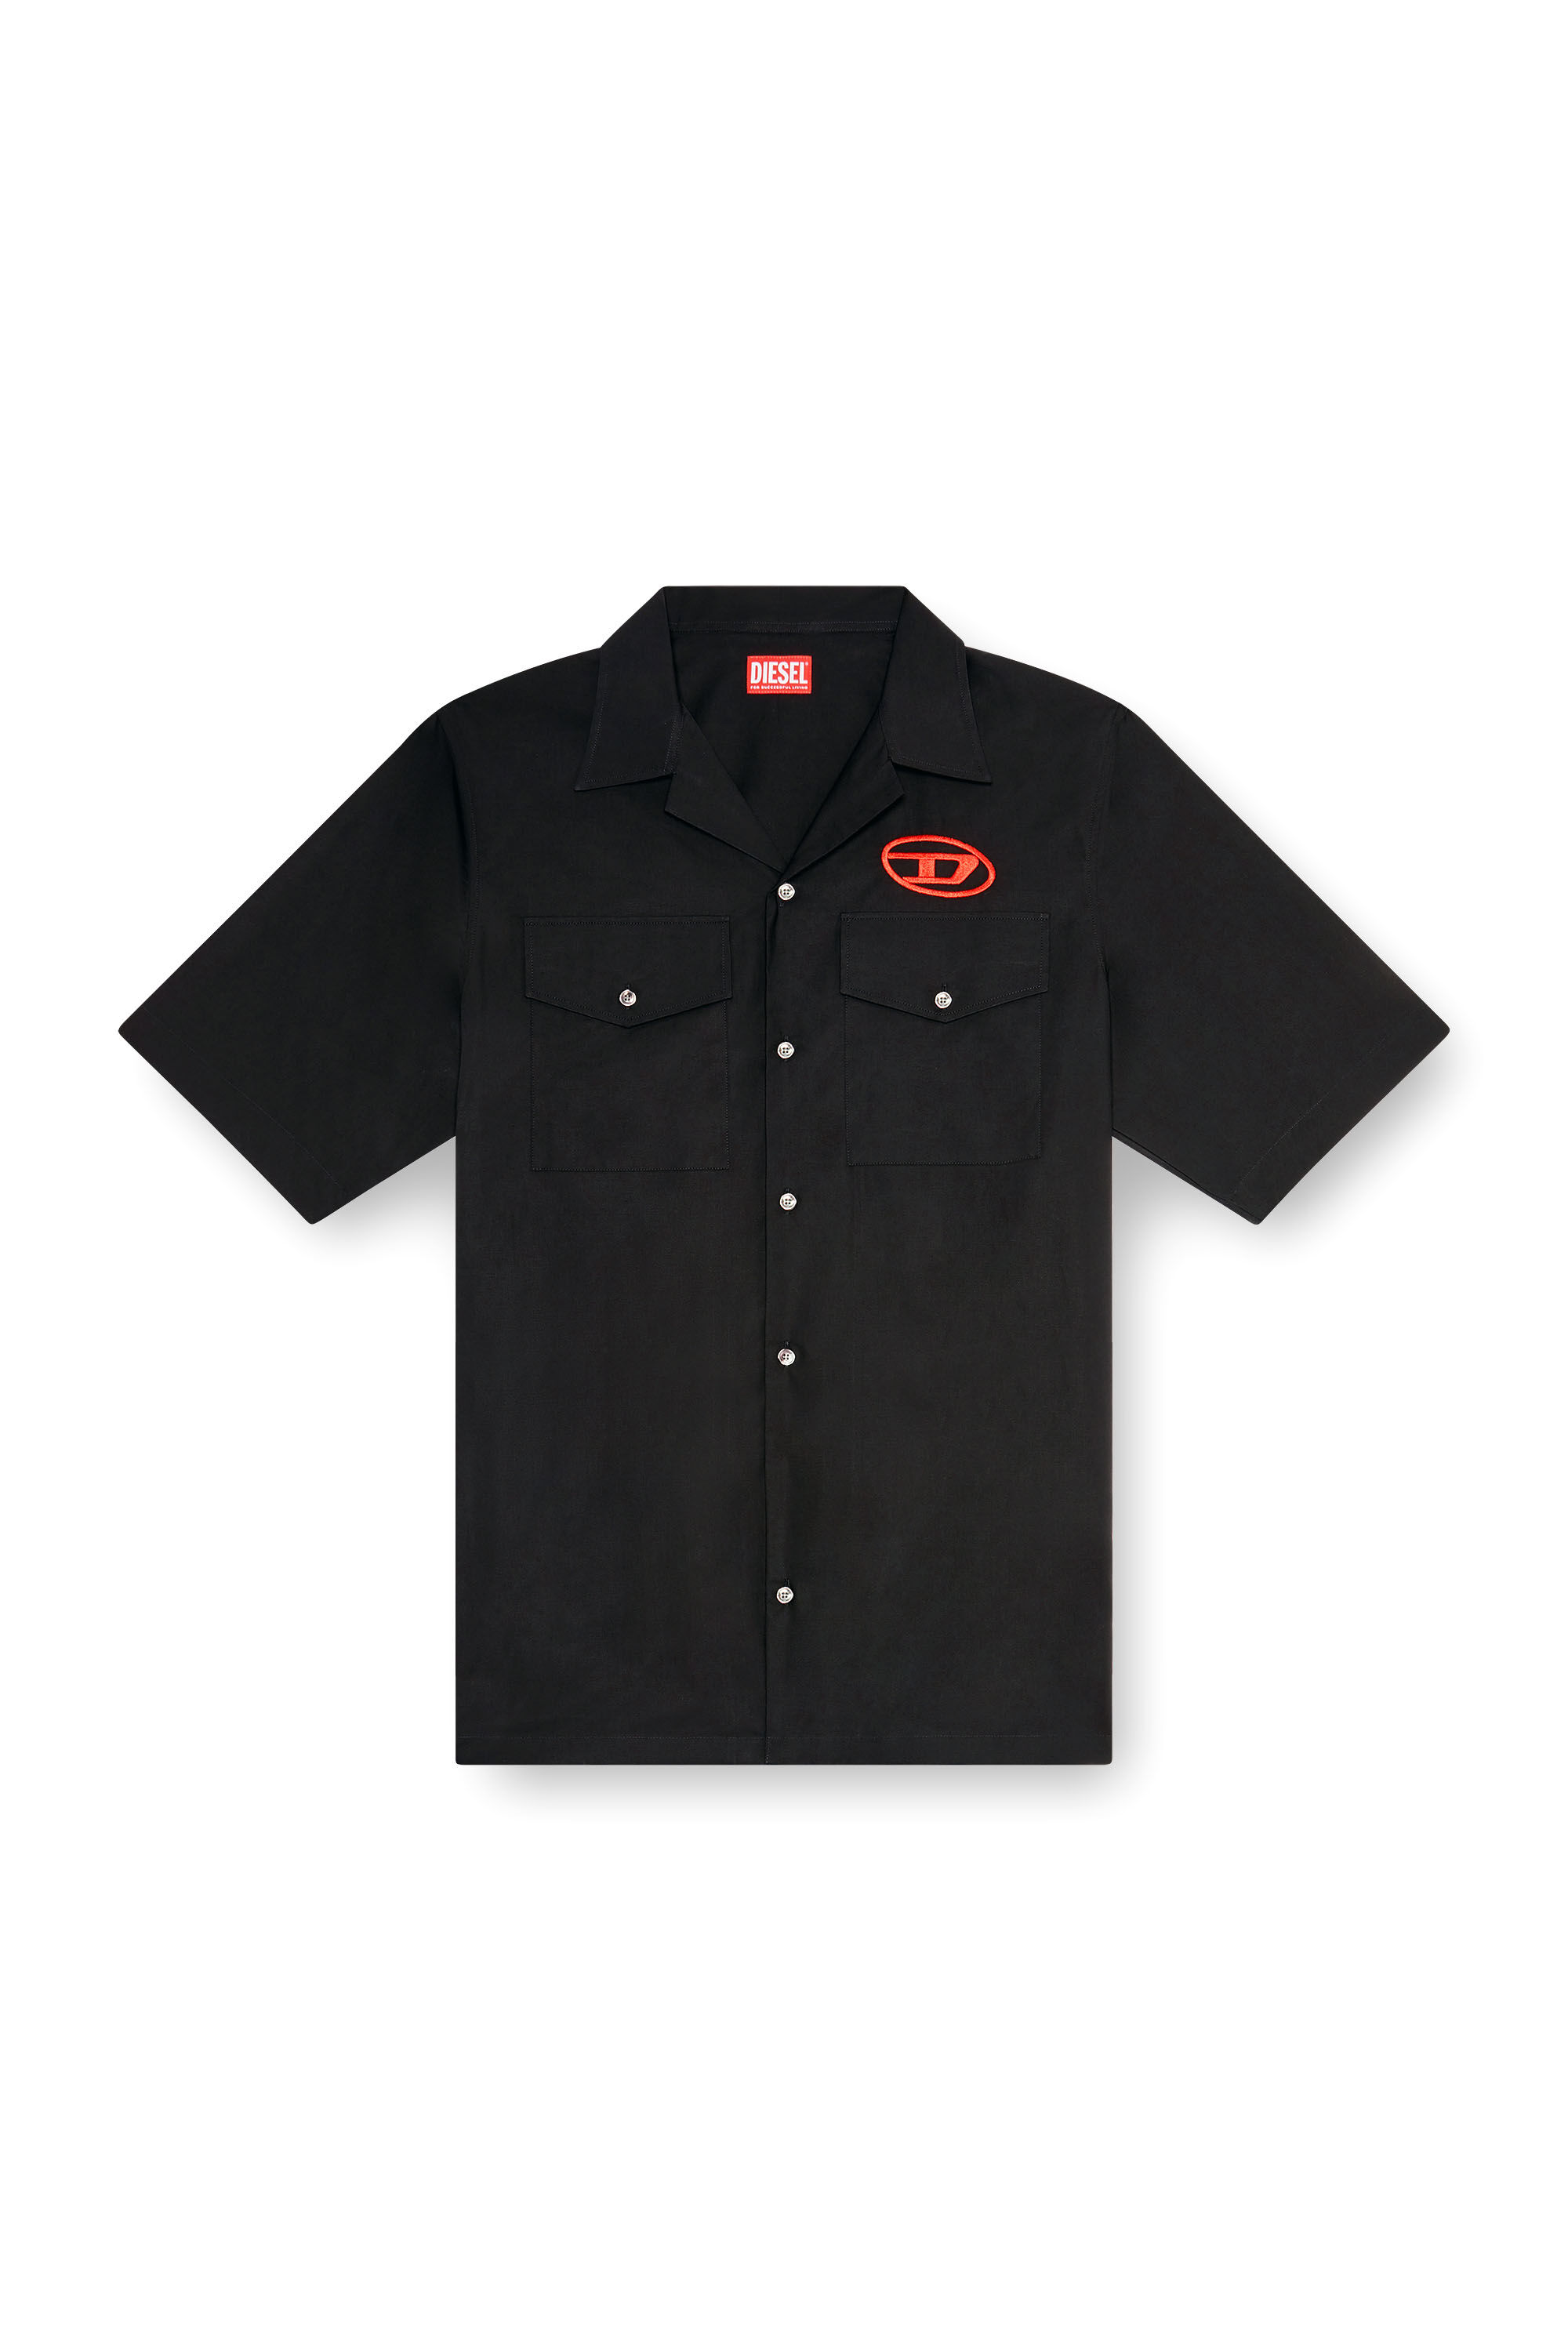 Diesel - S-MAC-22-B, Man Bowling shirt with embroidered logo in Black - Image 2